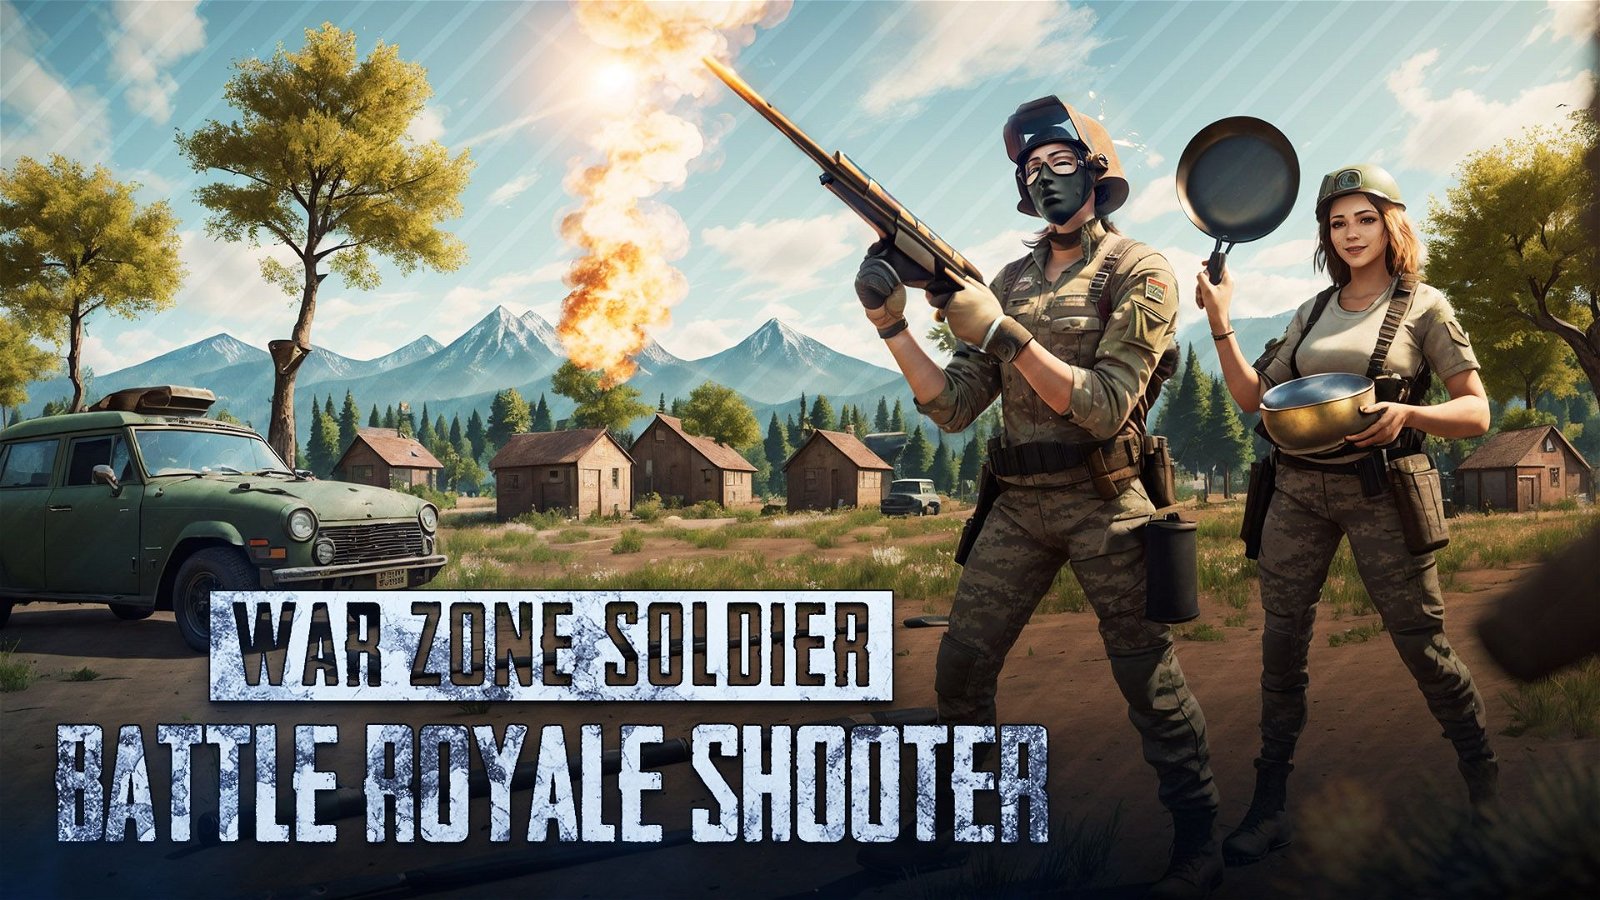 Image of War Zone Soldier: Battle Royale Shooter